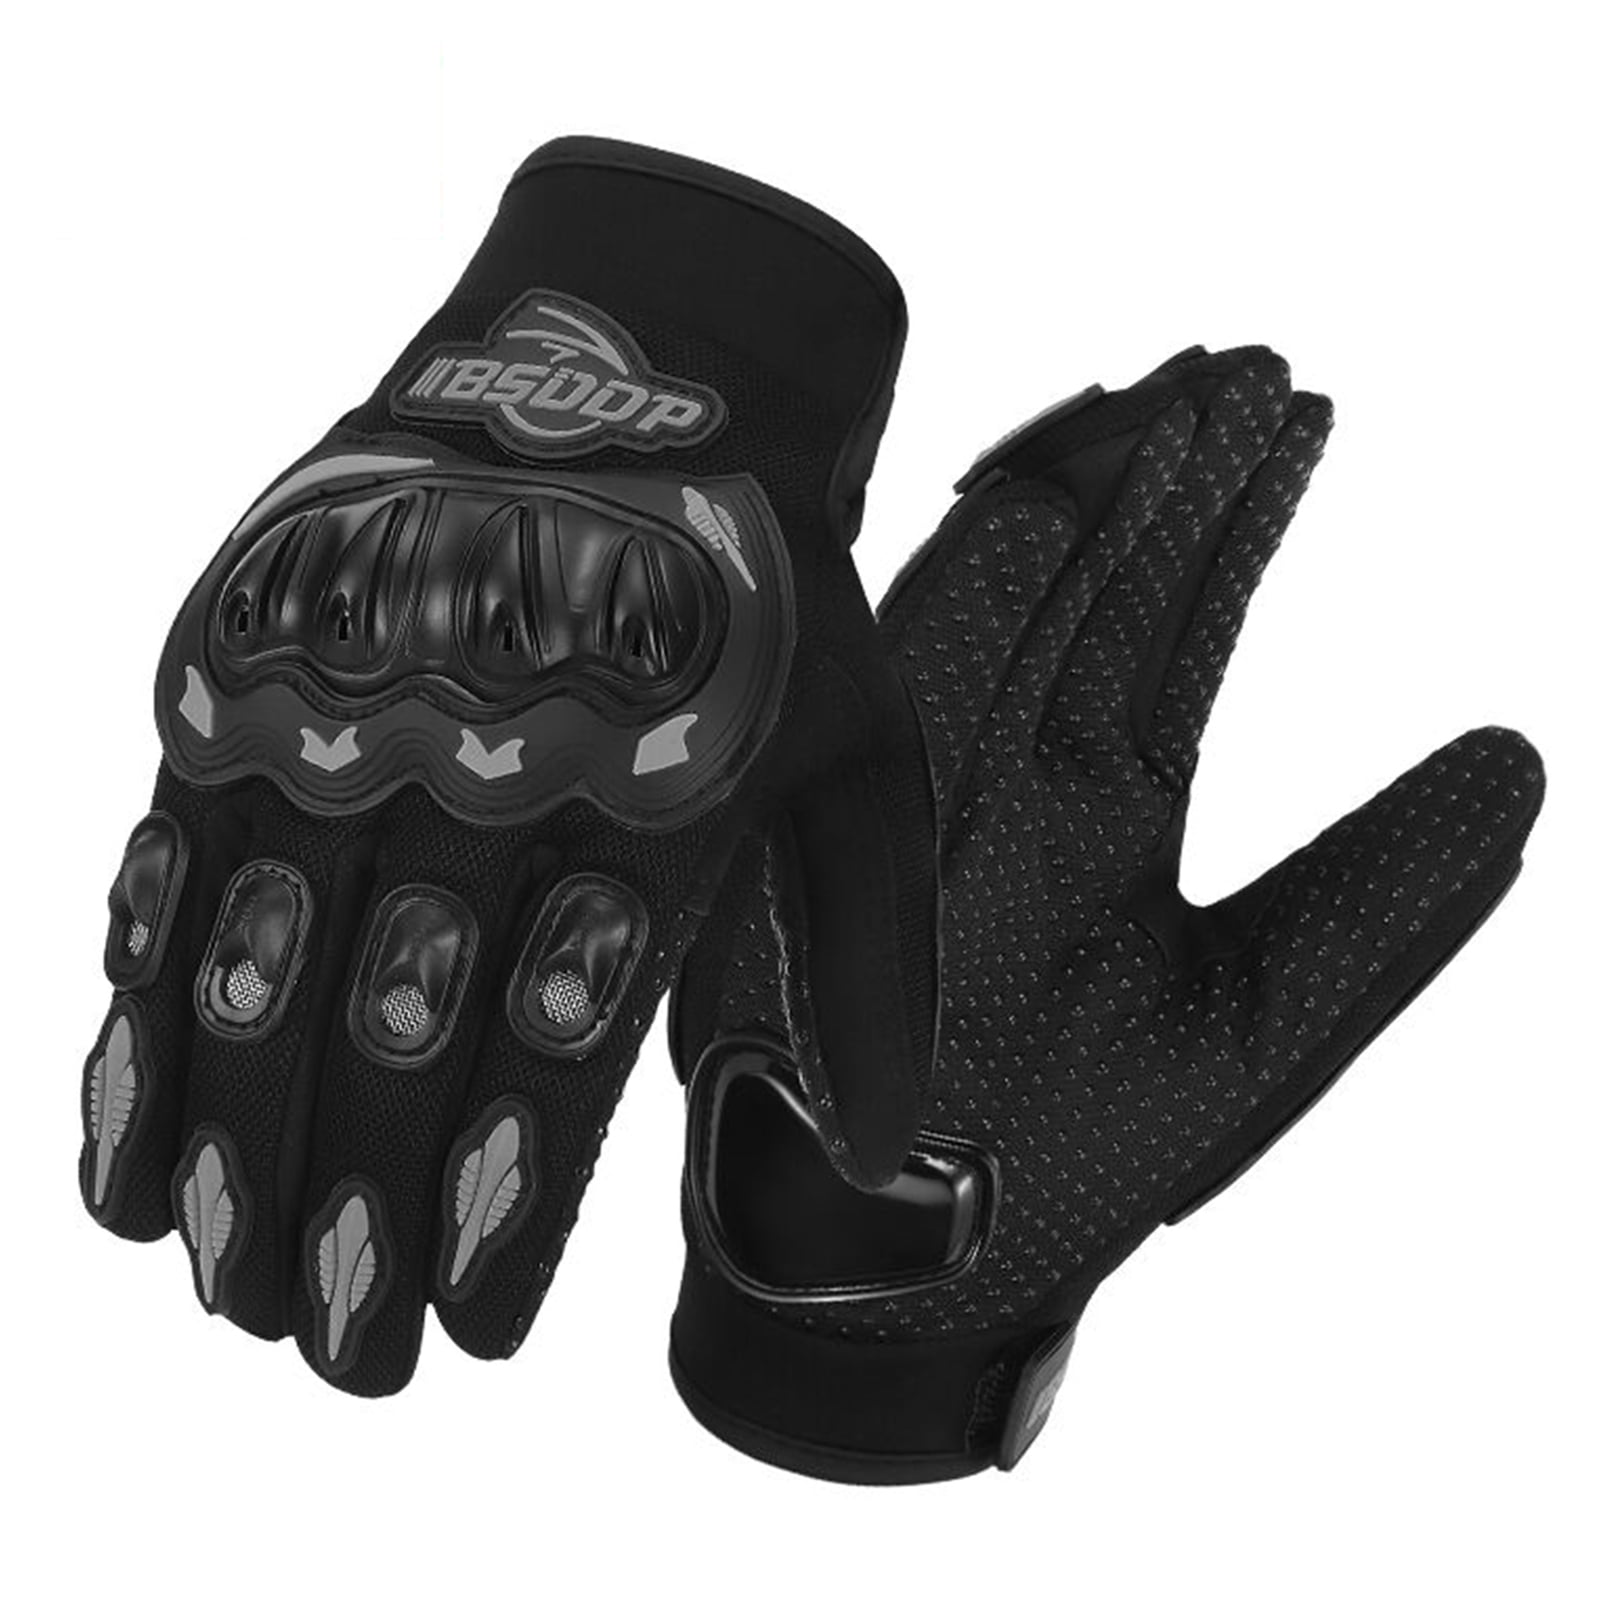 Motorcycle Gloves Cycling Scooter Glove Man Hard Knuckle Touchscreen for Motorcycle ATV Bike Climbing Hiking Cycling and Other Outdoor Sports 